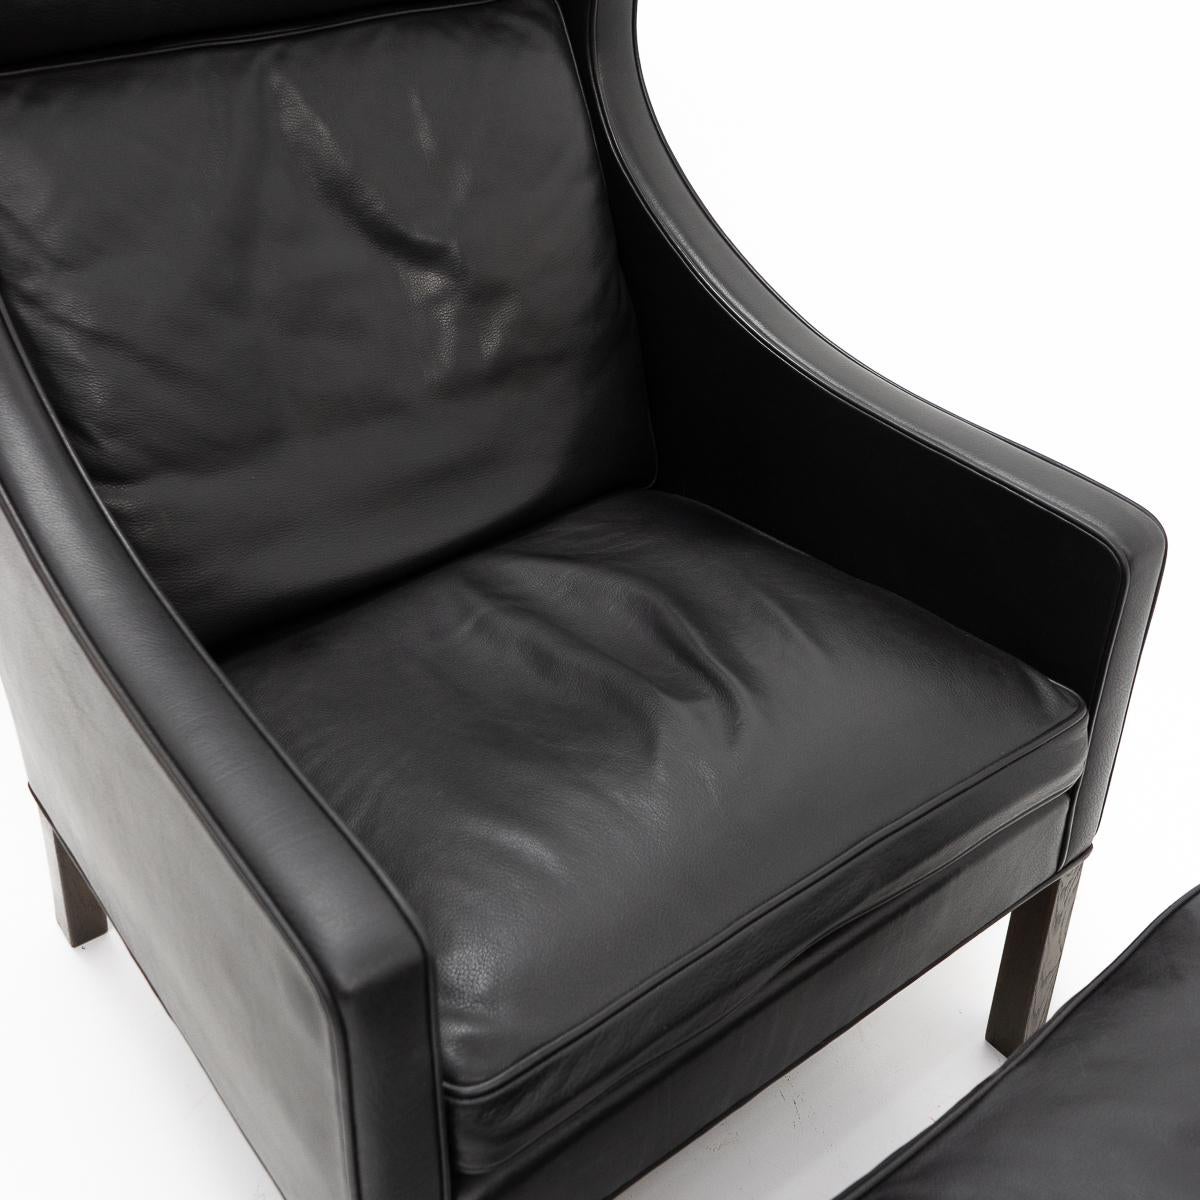 Design Classic Black Leather Wingchair and Footstool by Borge Mogensen, 1960s For Sale 1